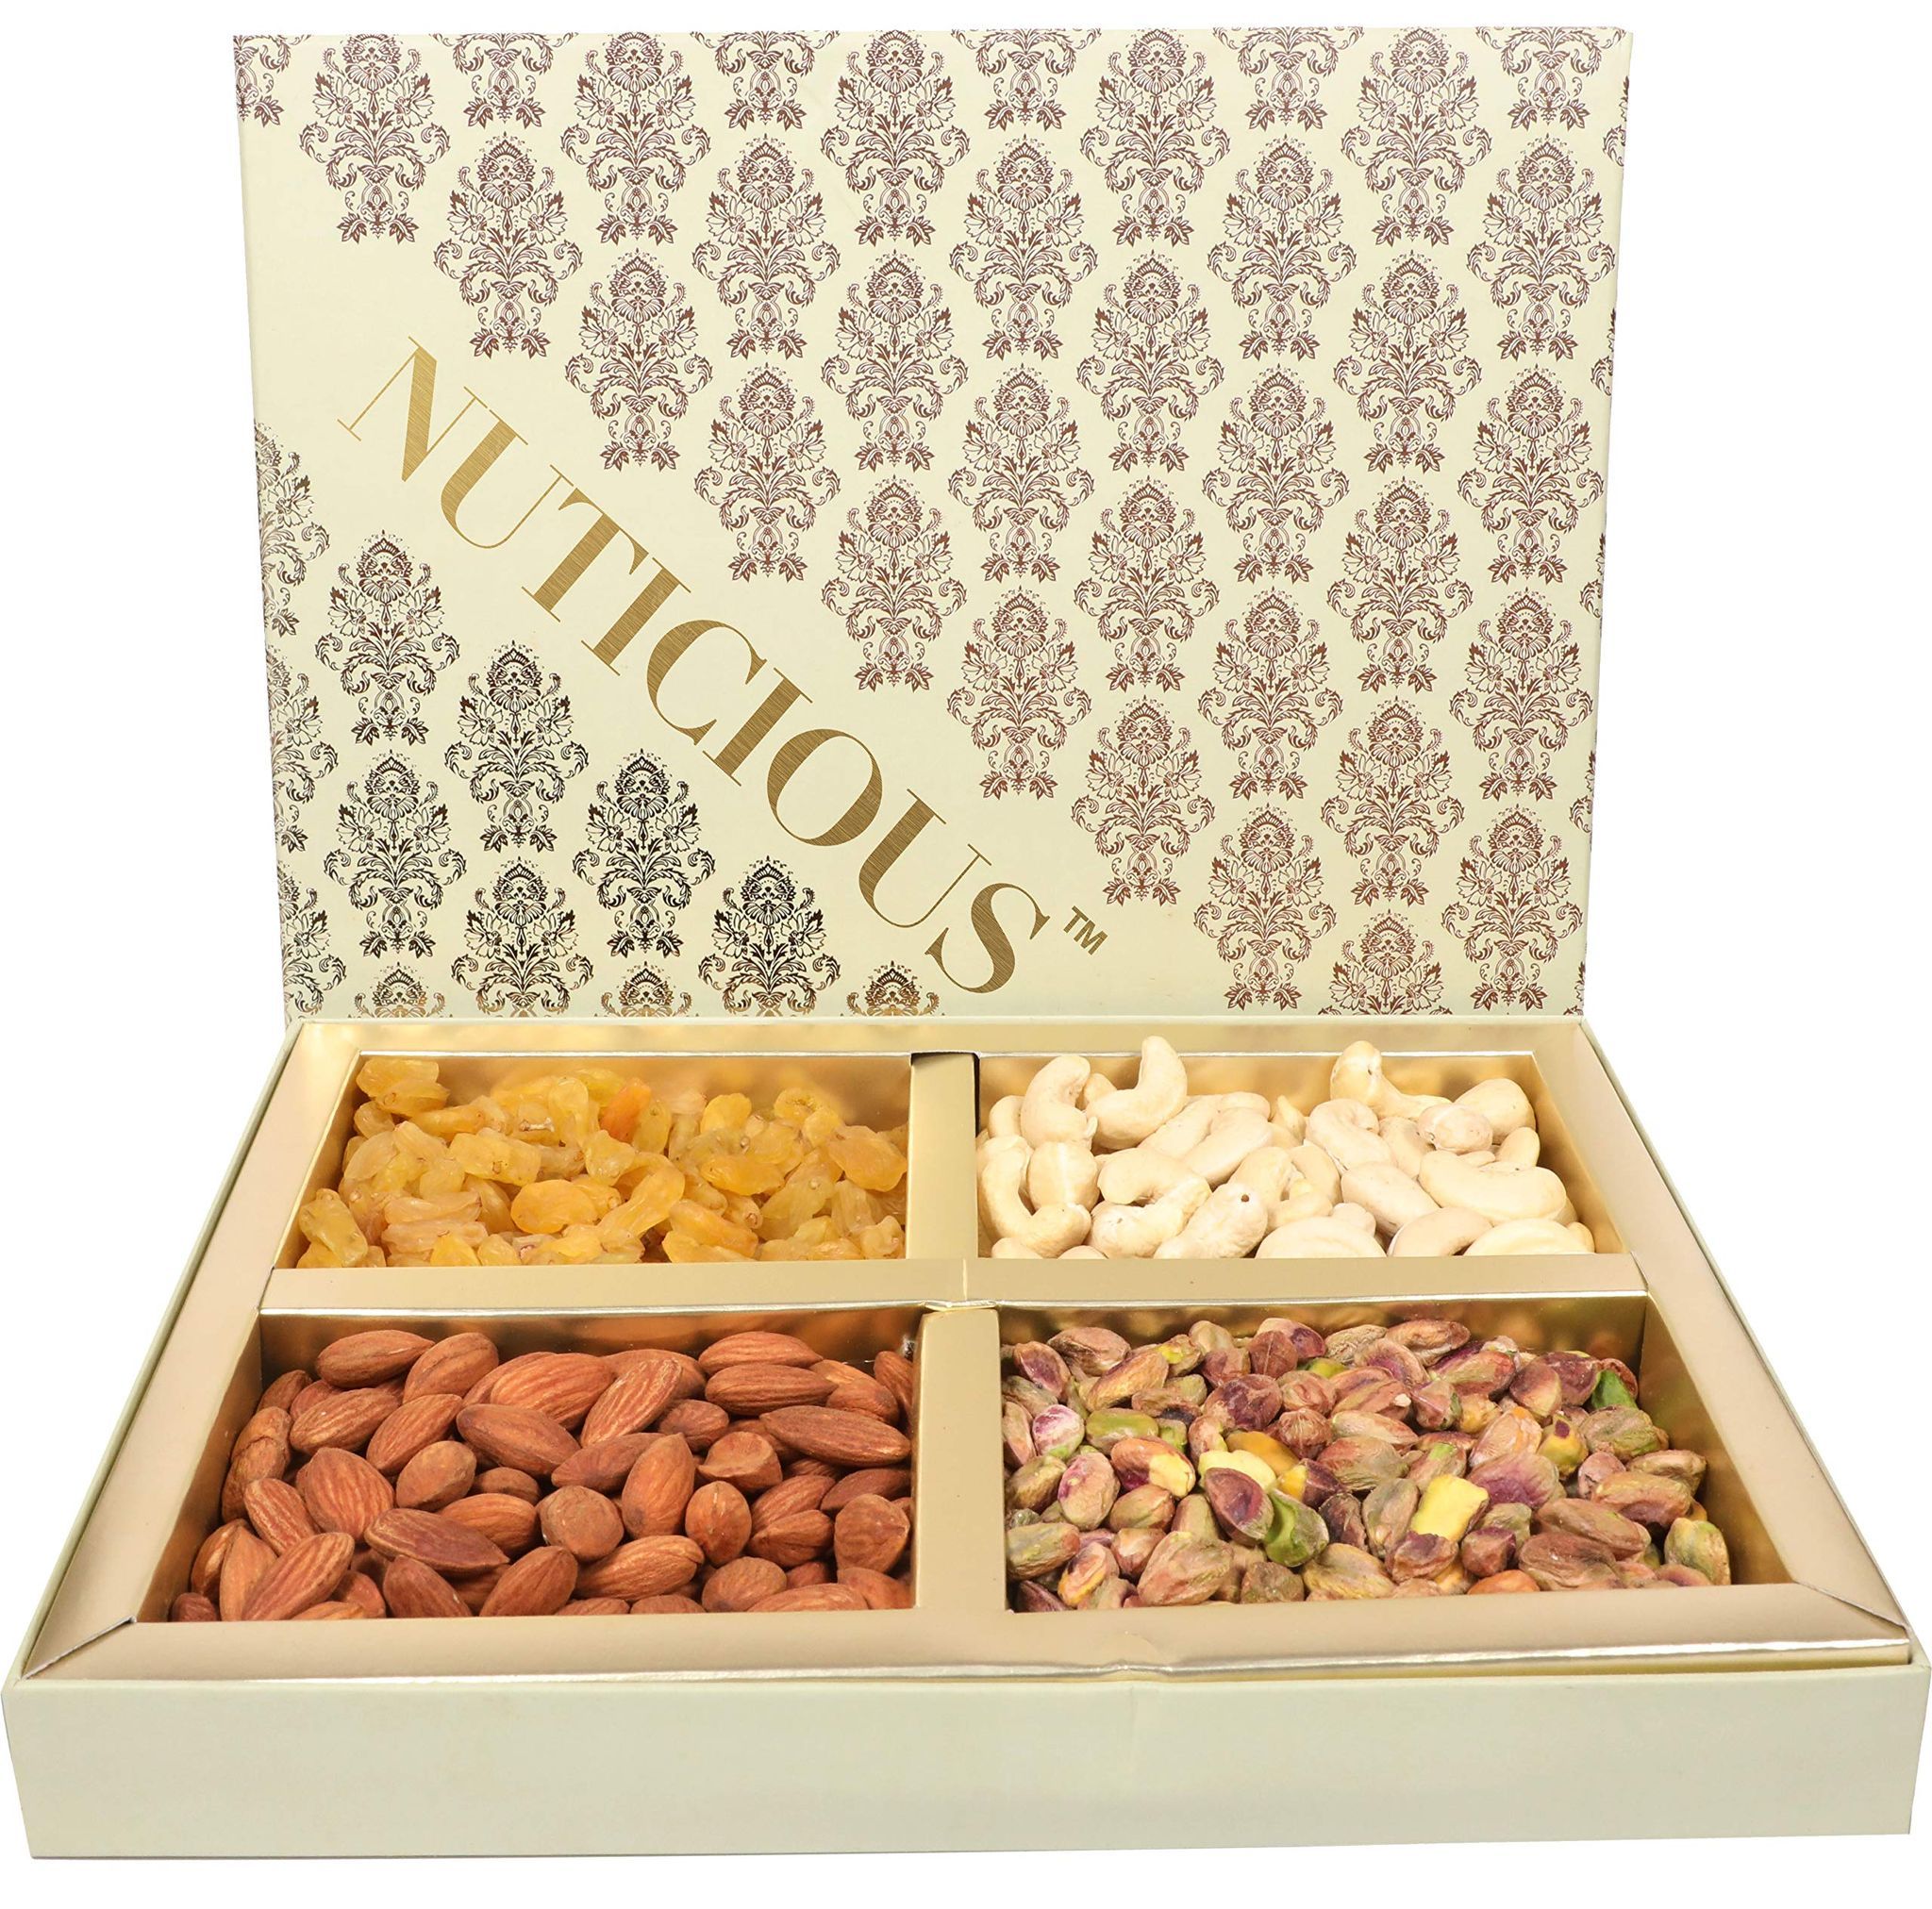 Wholesale Dry Fruit Box Manufacturers - Line N Curves, Jaipur: Order Food Packaging  box, Sweet, Corrugated Box, chocolates box, fancy bag and garments tag  manufacturer